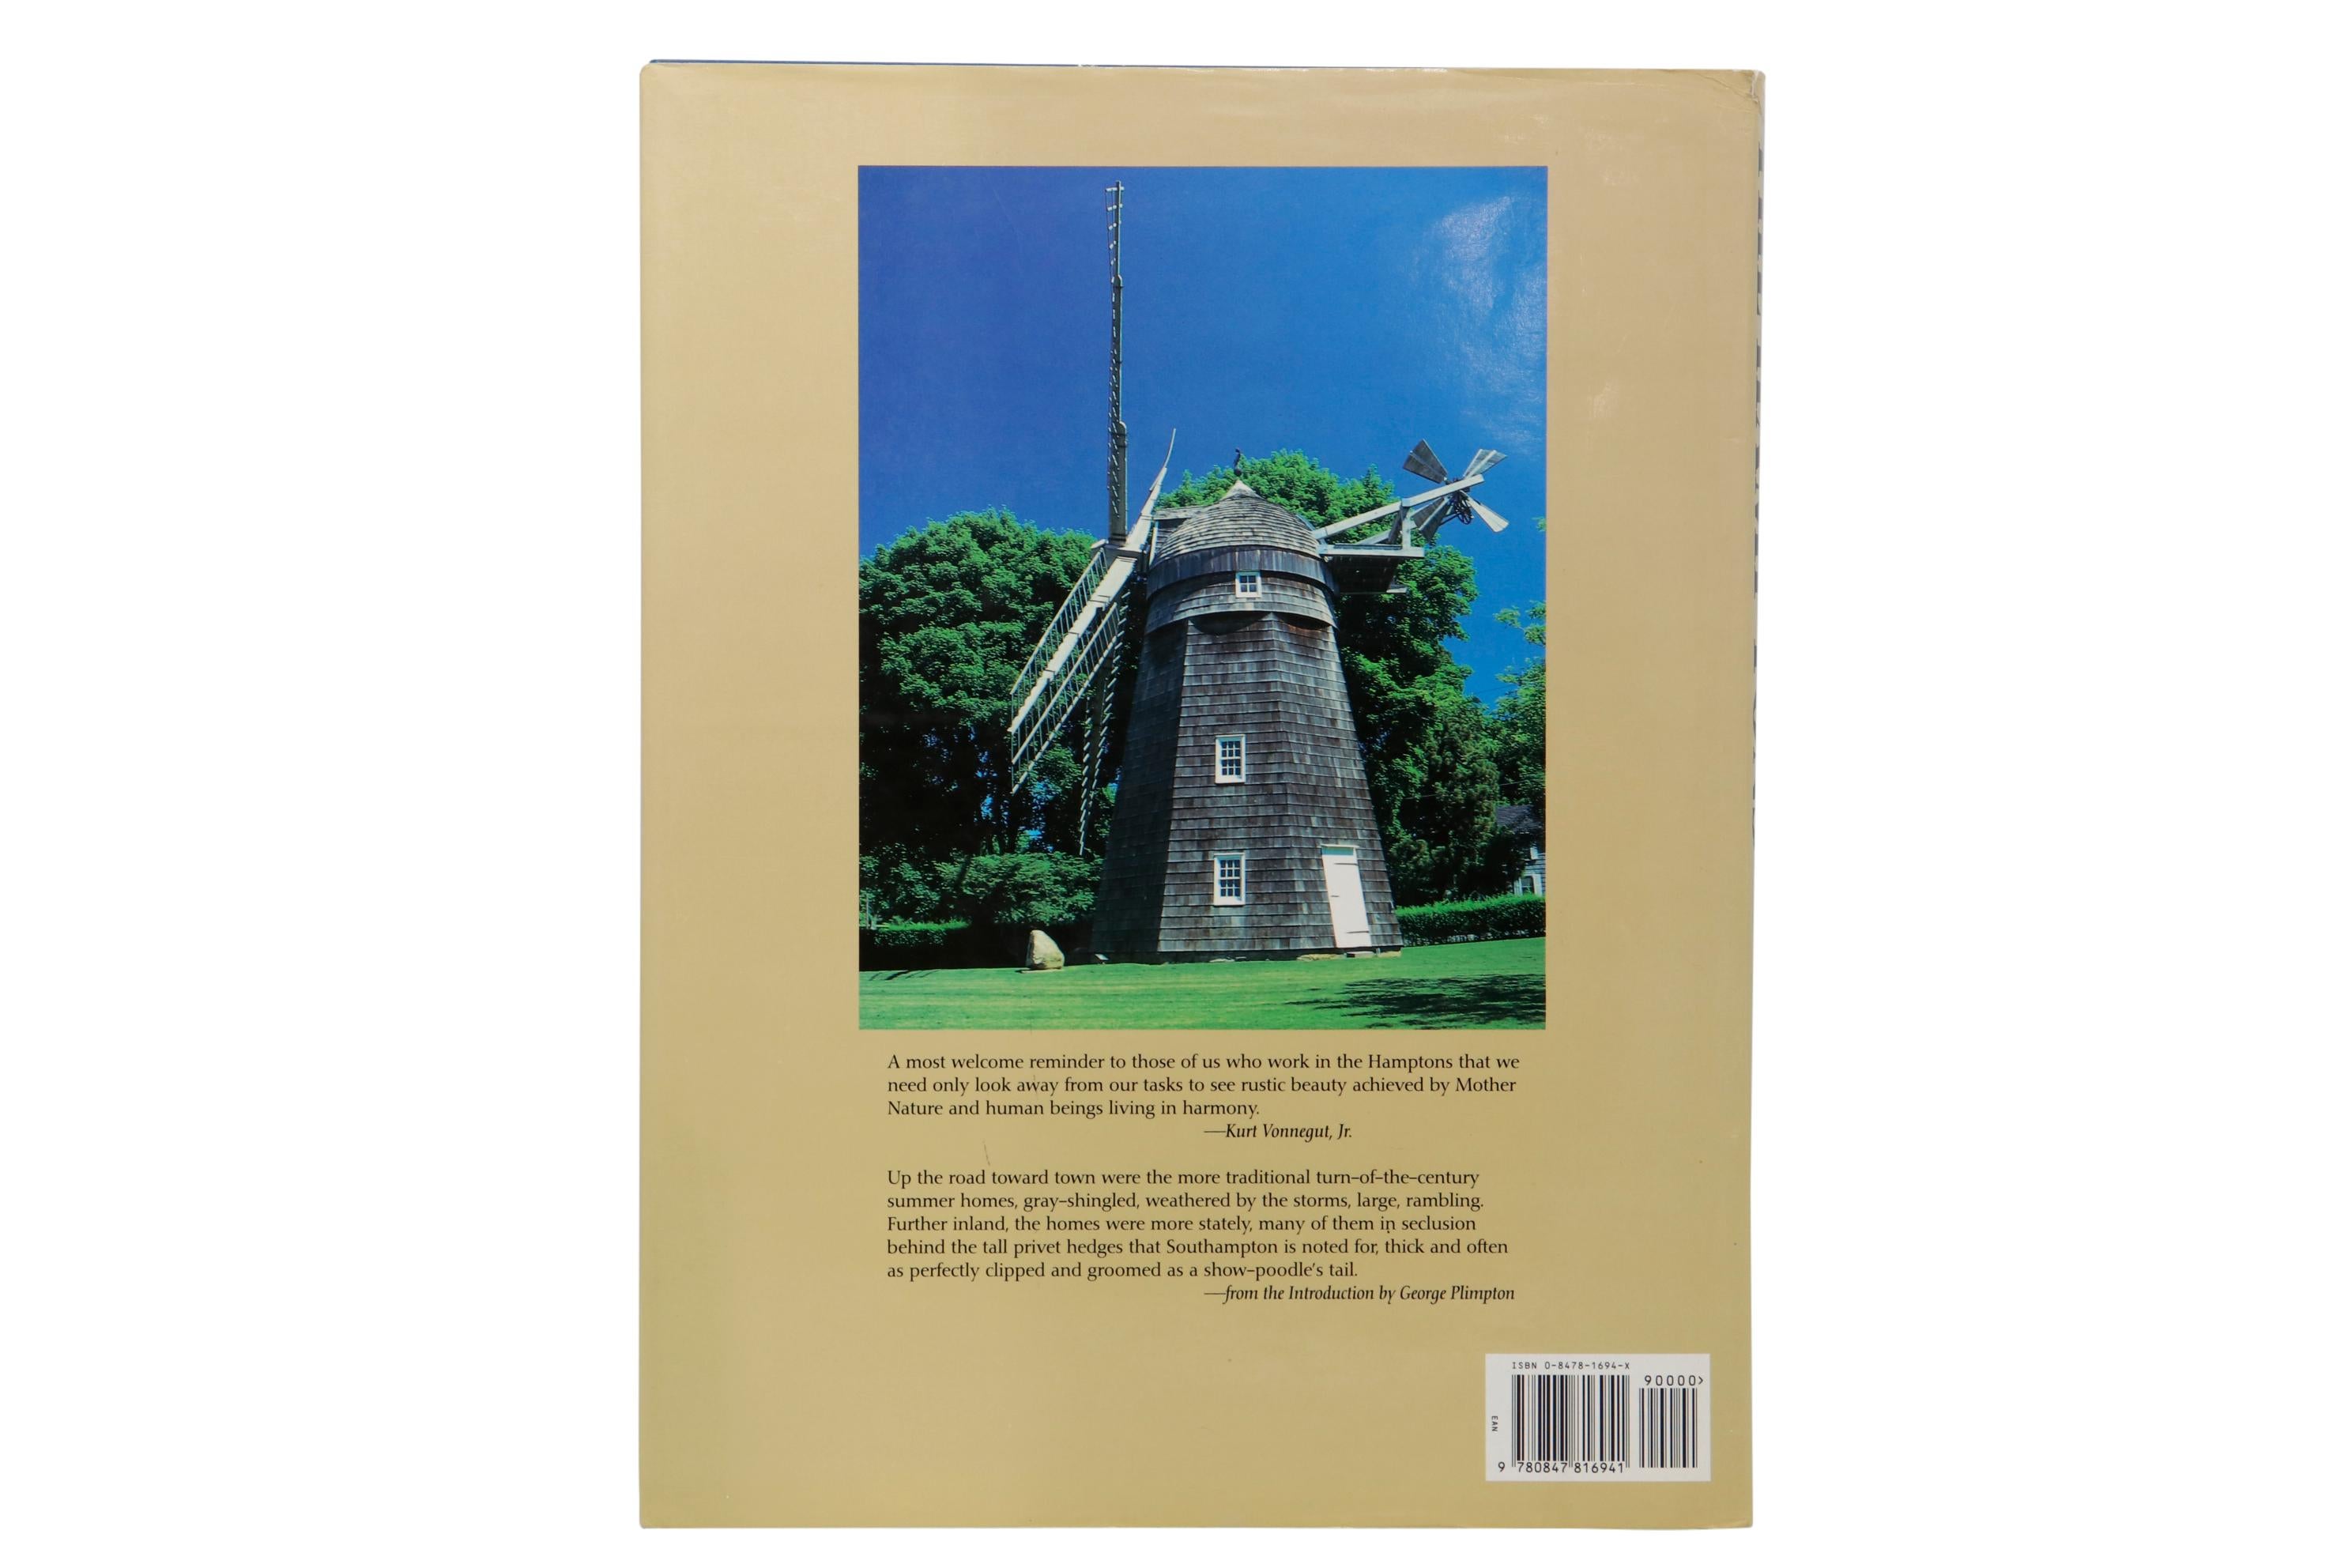 The Hamptons - Long Island's East End. Photographs by Ken Miller, introduction by George Plimpton. First edition published in 1993 by Rizzoli International Publications, Inc. of New York. Hardcover book with dustjacket, 208 pages. 